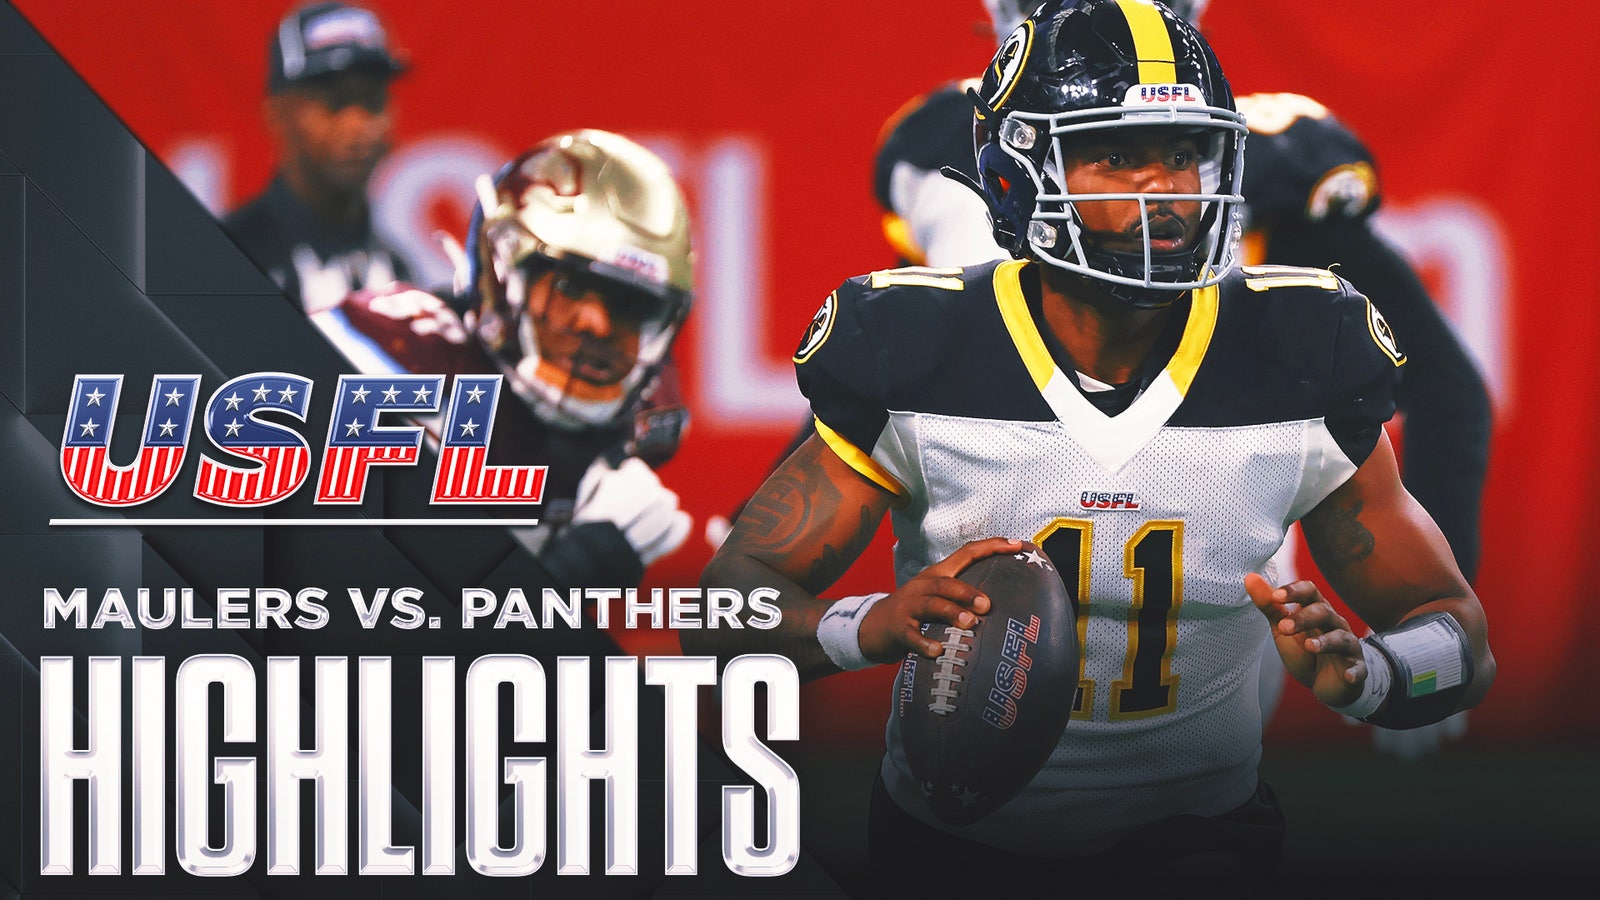 Highlights of Pittsburgh Maulers vs. Michigan Panthers